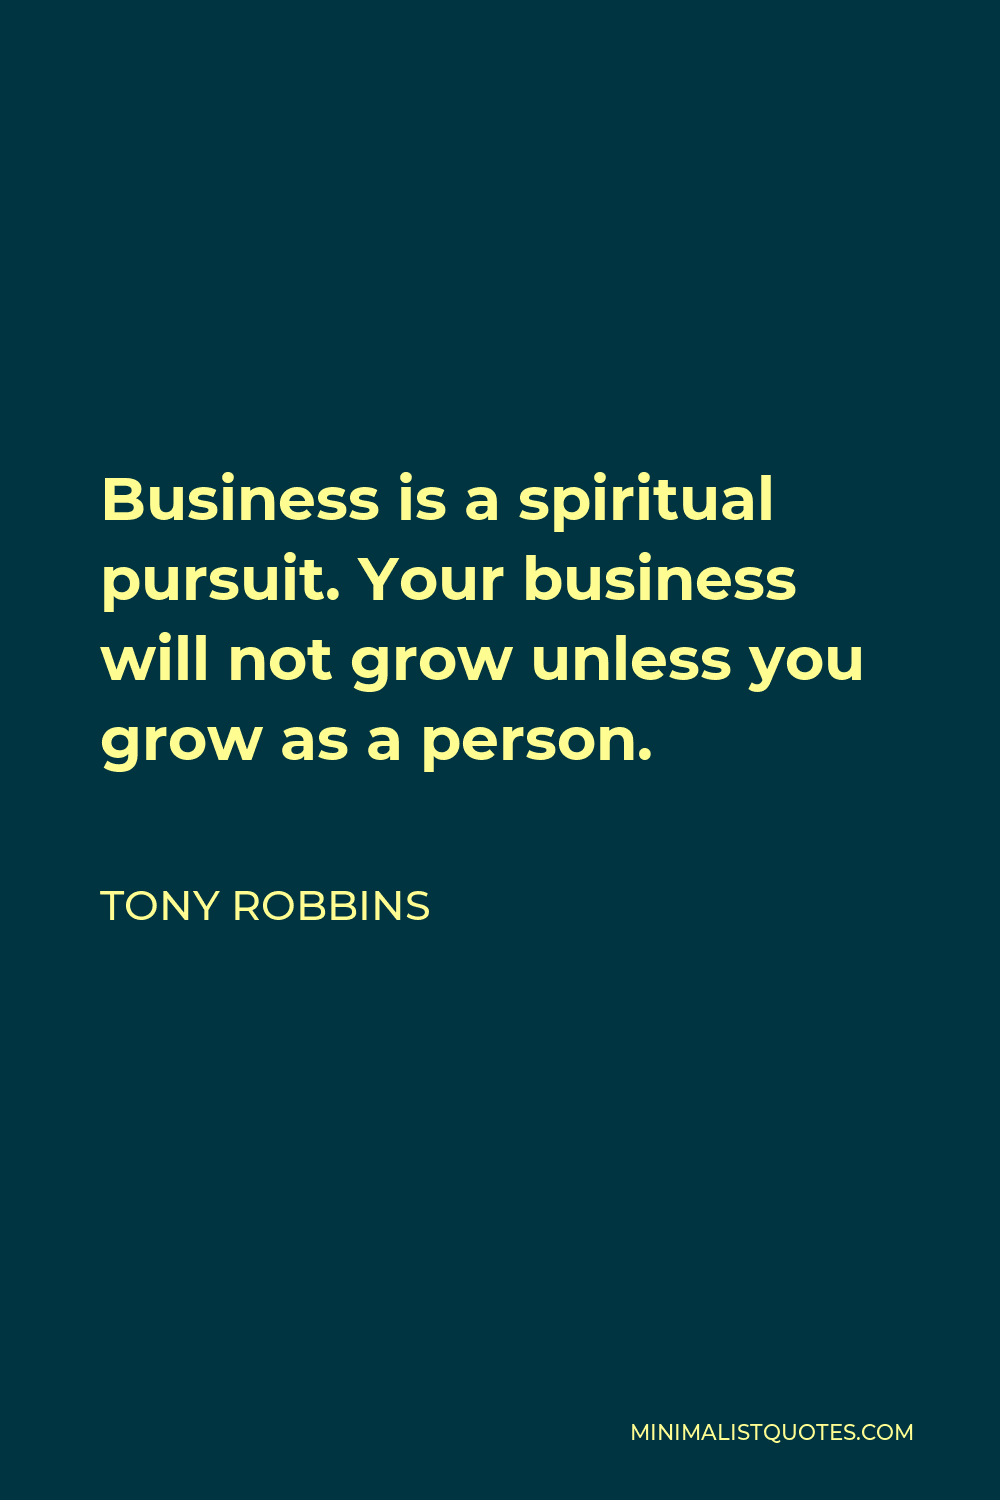 Tony Robbins Quote - Business is a spiritual pursuit. Your business will not grow unless you grow as a person.